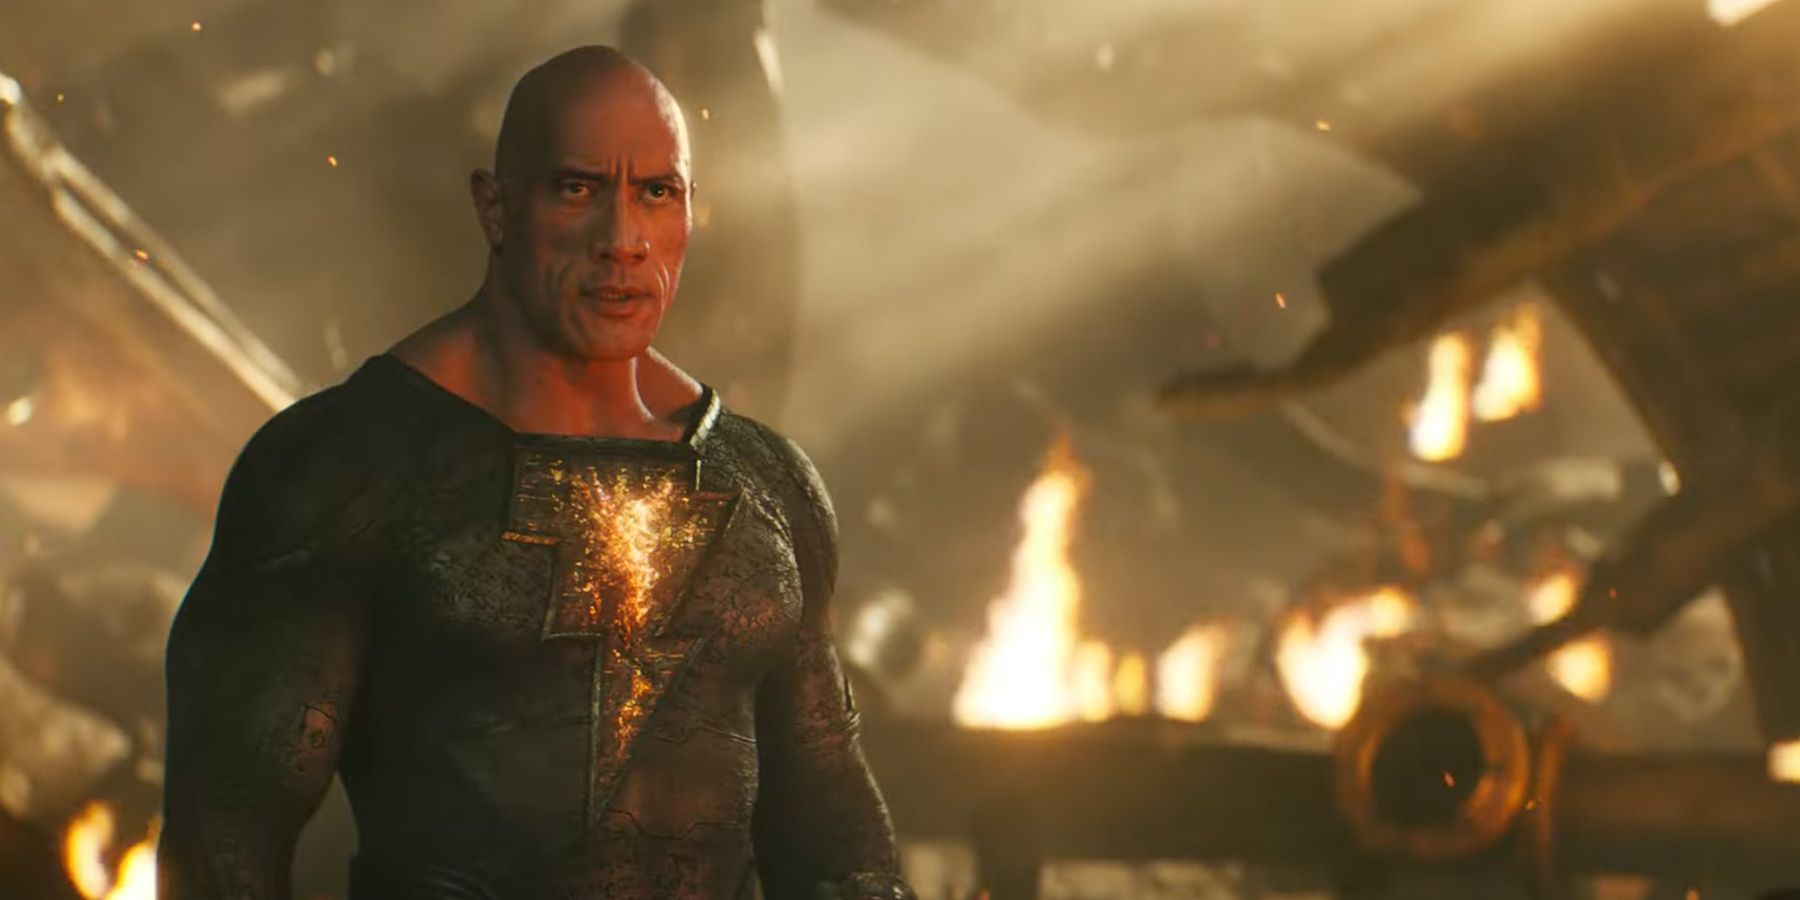 Dwayne Johnson as Black Adam in action scene with fiery background